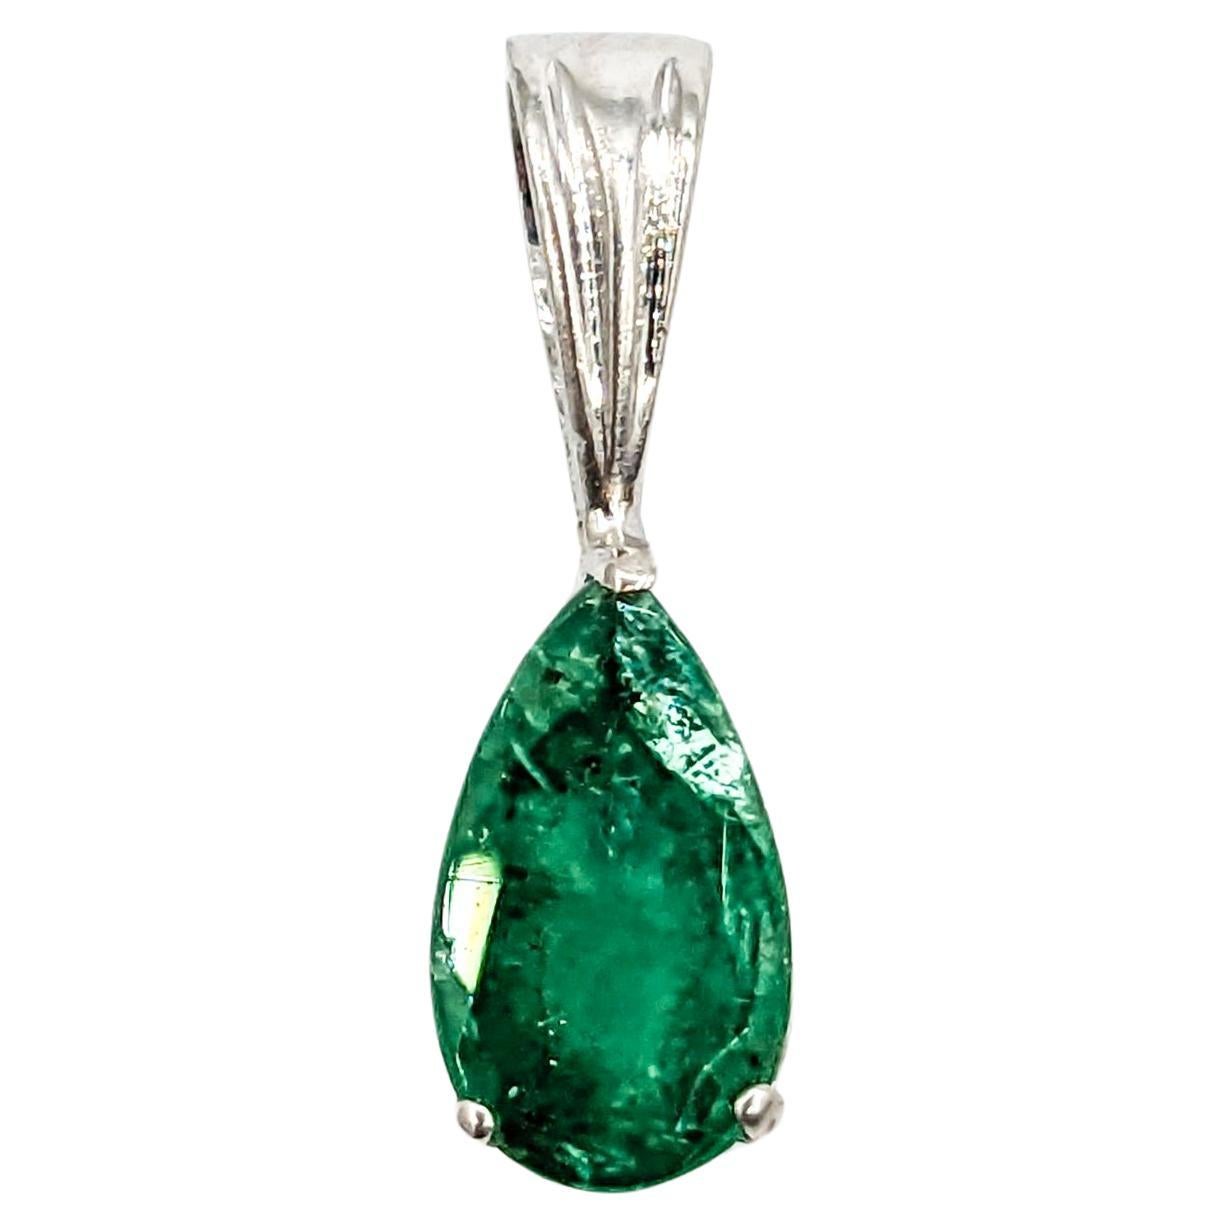 Emerald Drop Pendant in Platinum

Unveil the allure of our magnificent pendant, intricately crafted in 900pt platinum, and adorned with a brilliant 0.75ct pear shape emerald. The sparkling gem captures the essence of timeless beauty. This exquisite